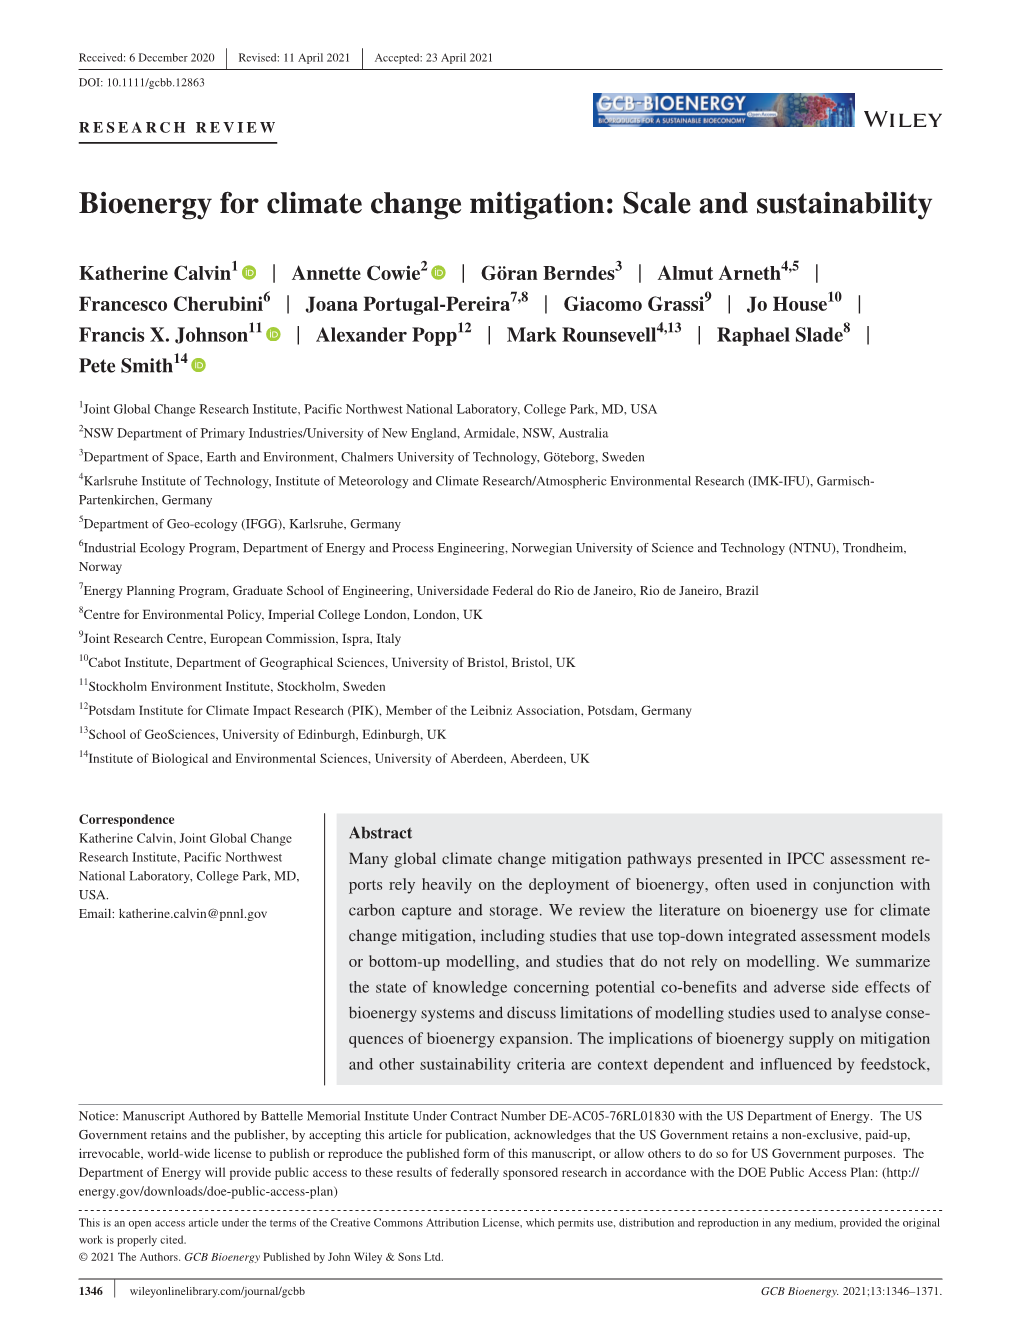 Bioenergy for Climate Change Mitigation: Scale and Sustainability